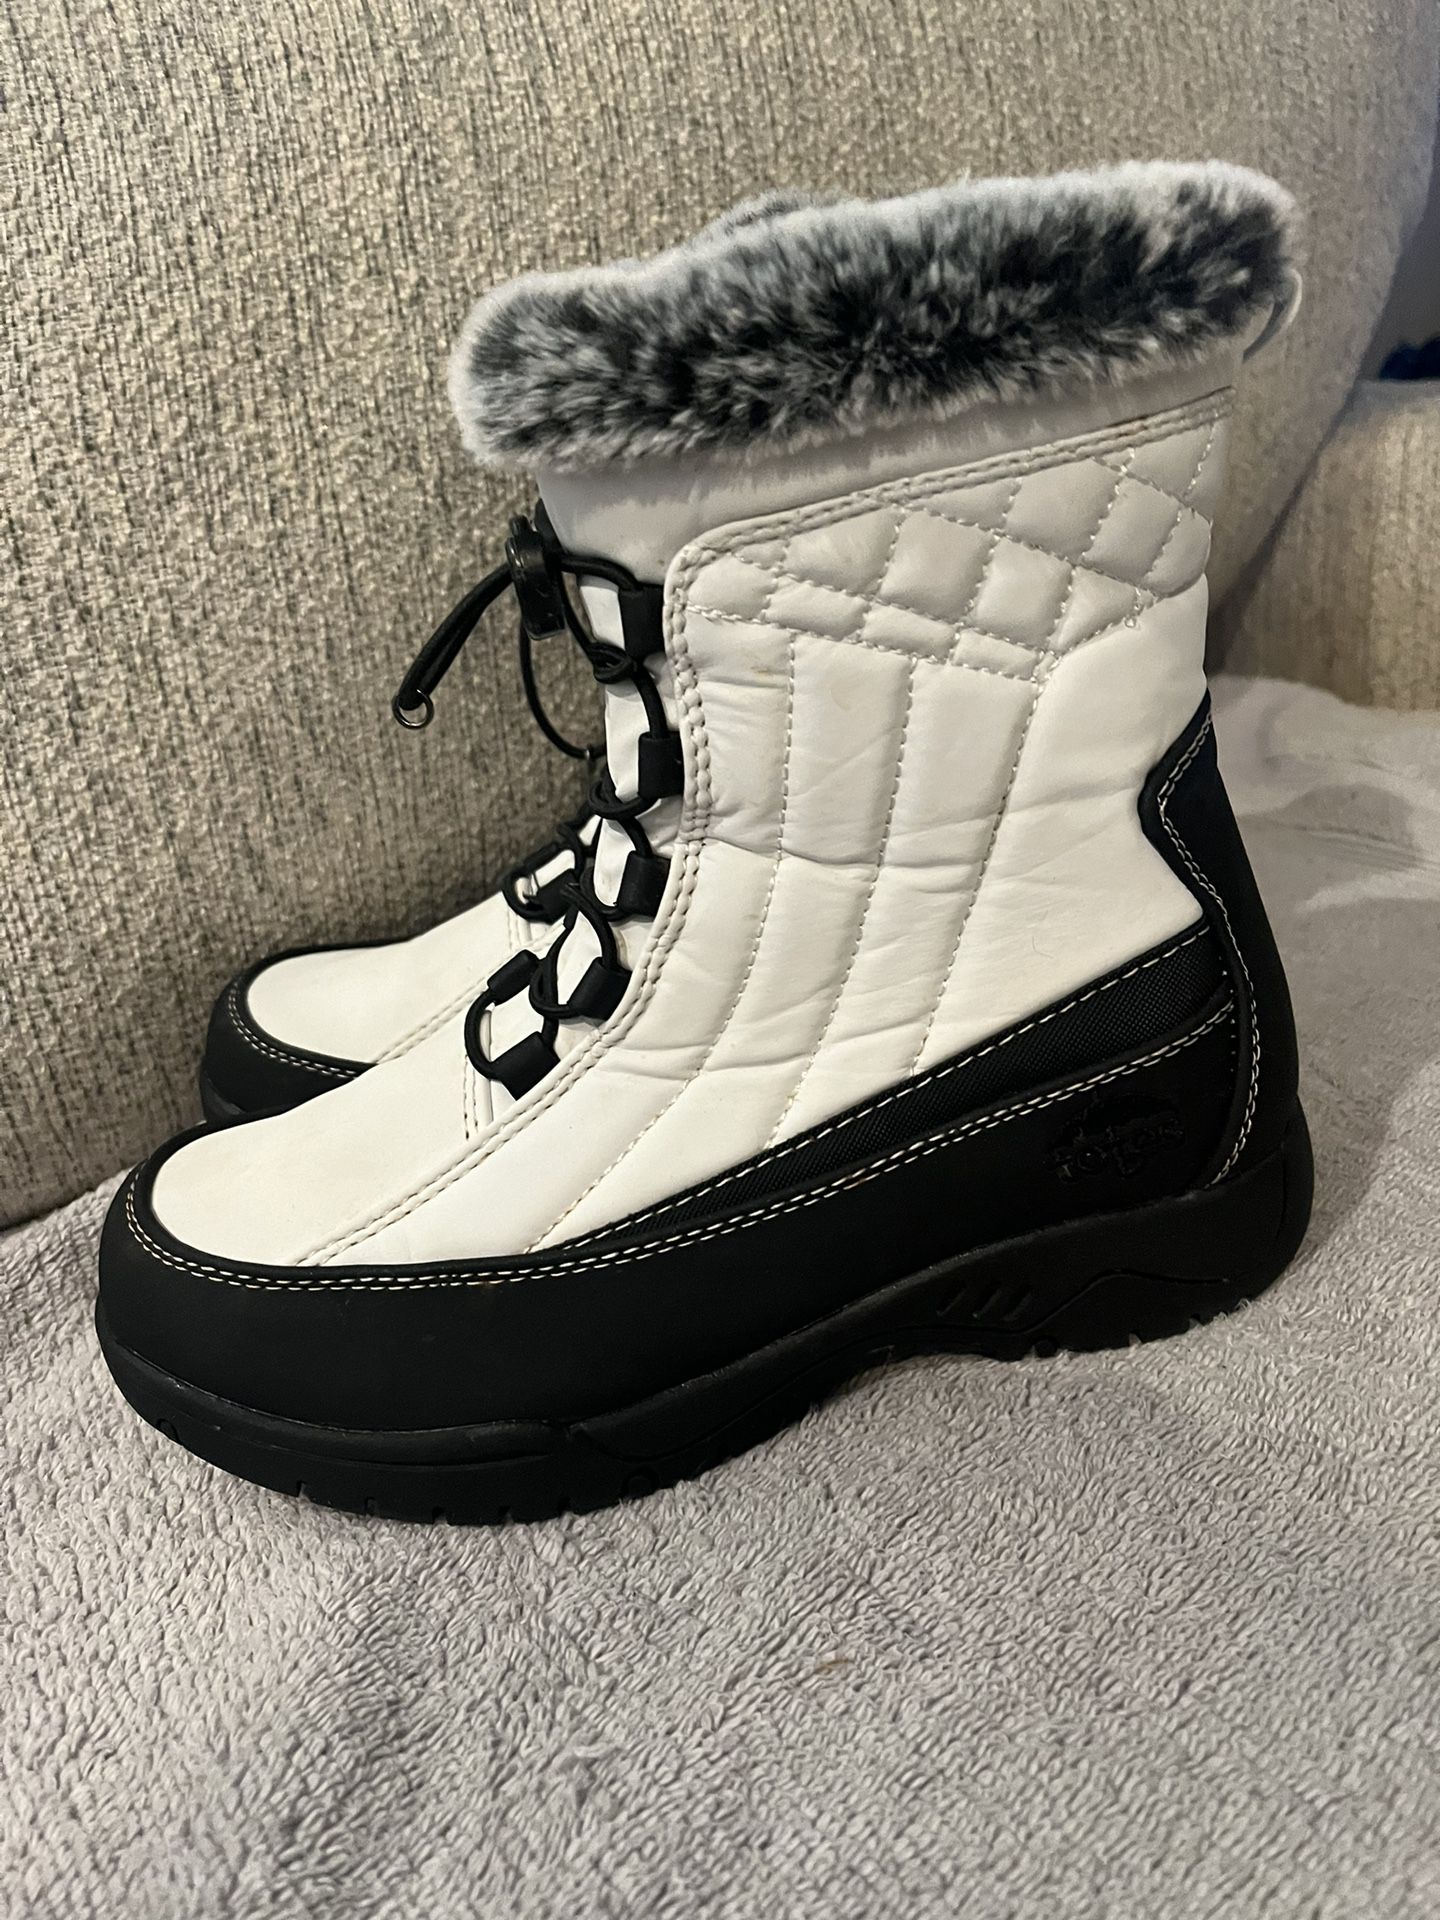 Girls/womens Snow Boots Size 6y